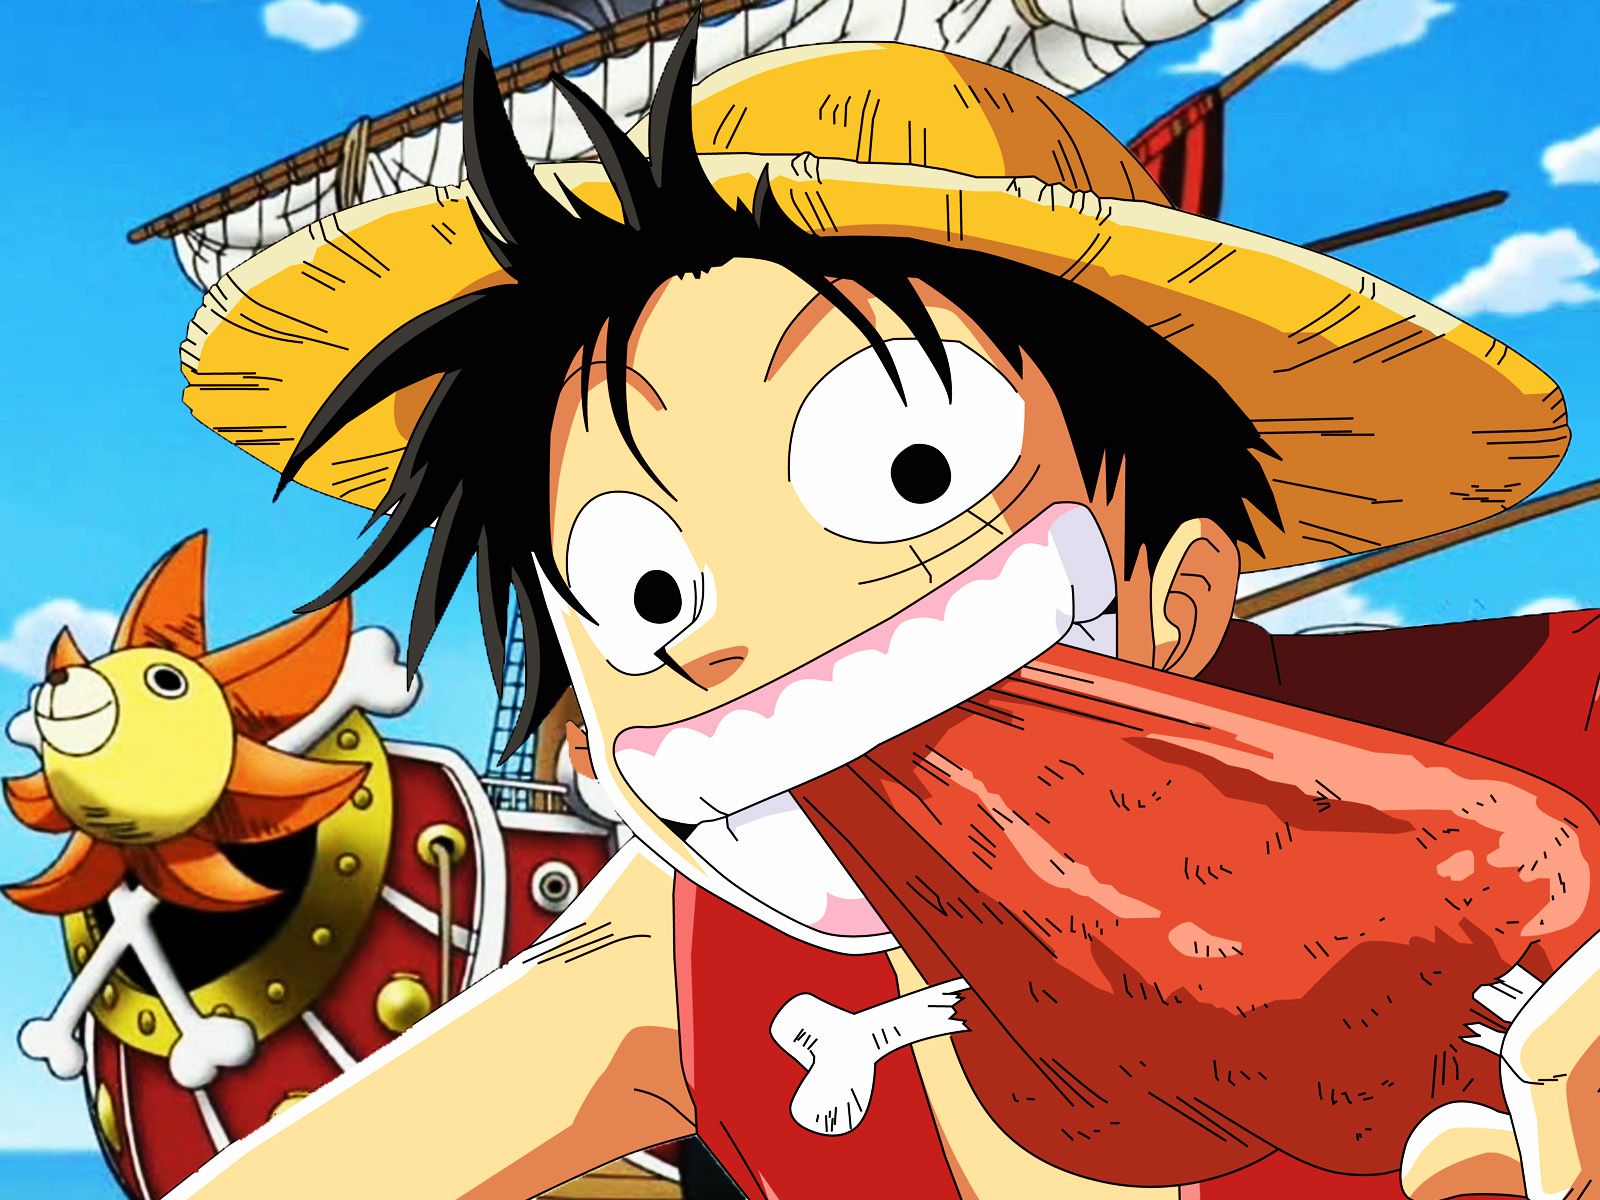 luffy-haki-wallpapers-113686-1524137-5306505.png.